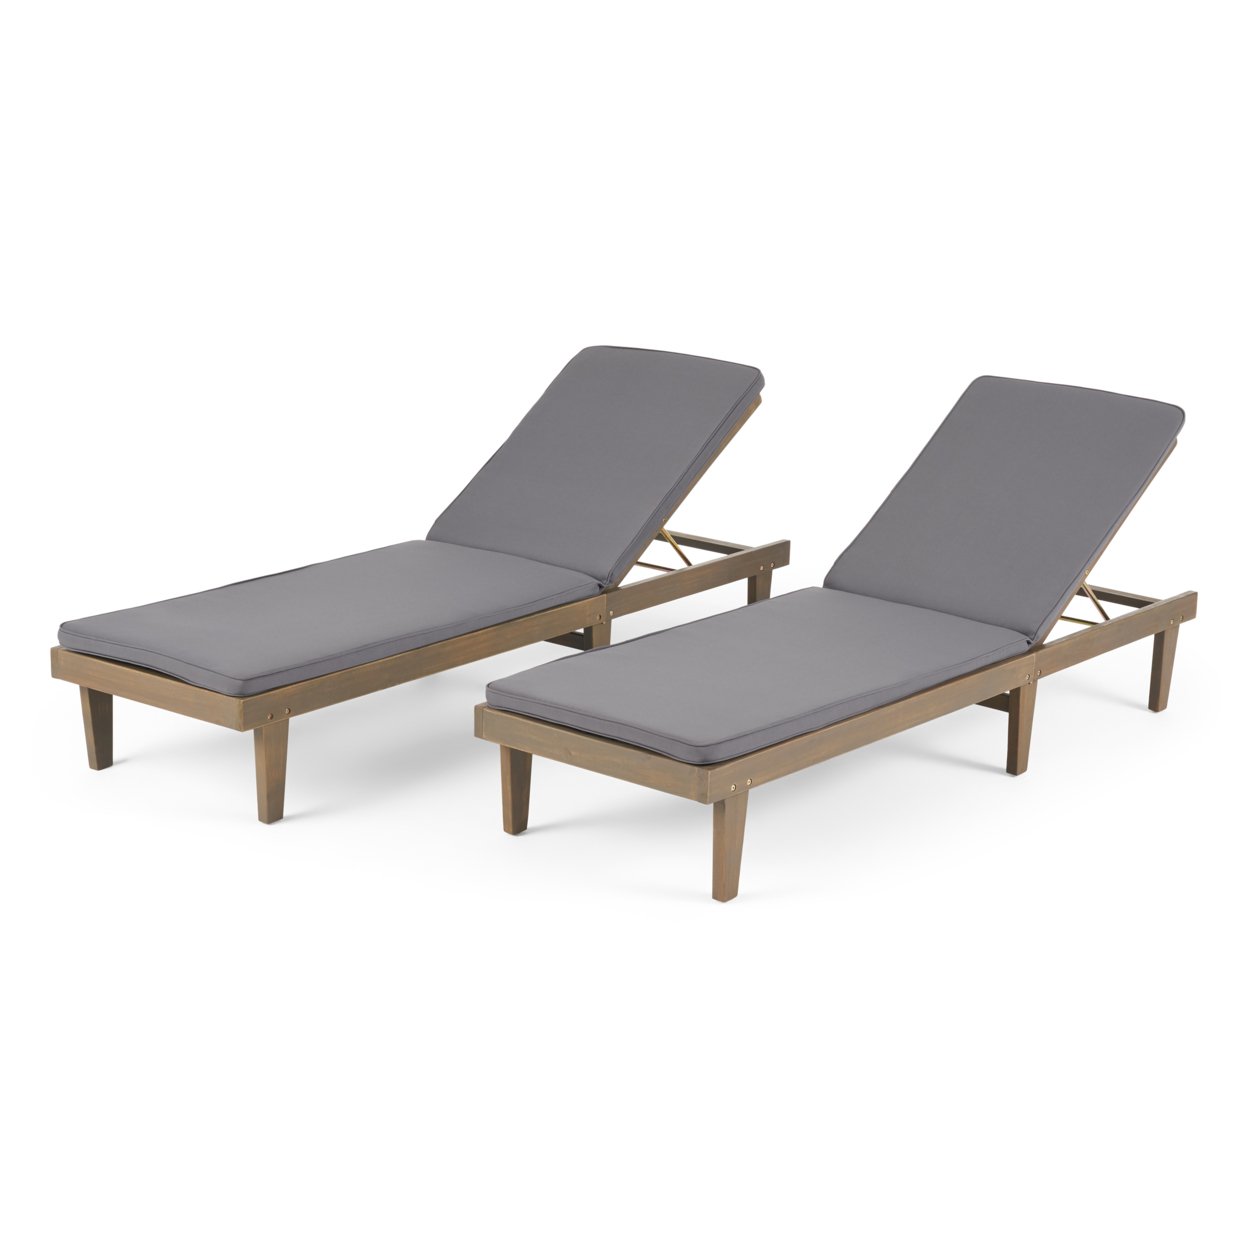 Madge Oudoor Modern Acacia Wood Chaise Lounge With Cushion (Set Of 2) - Gray Finish + Dark Gray